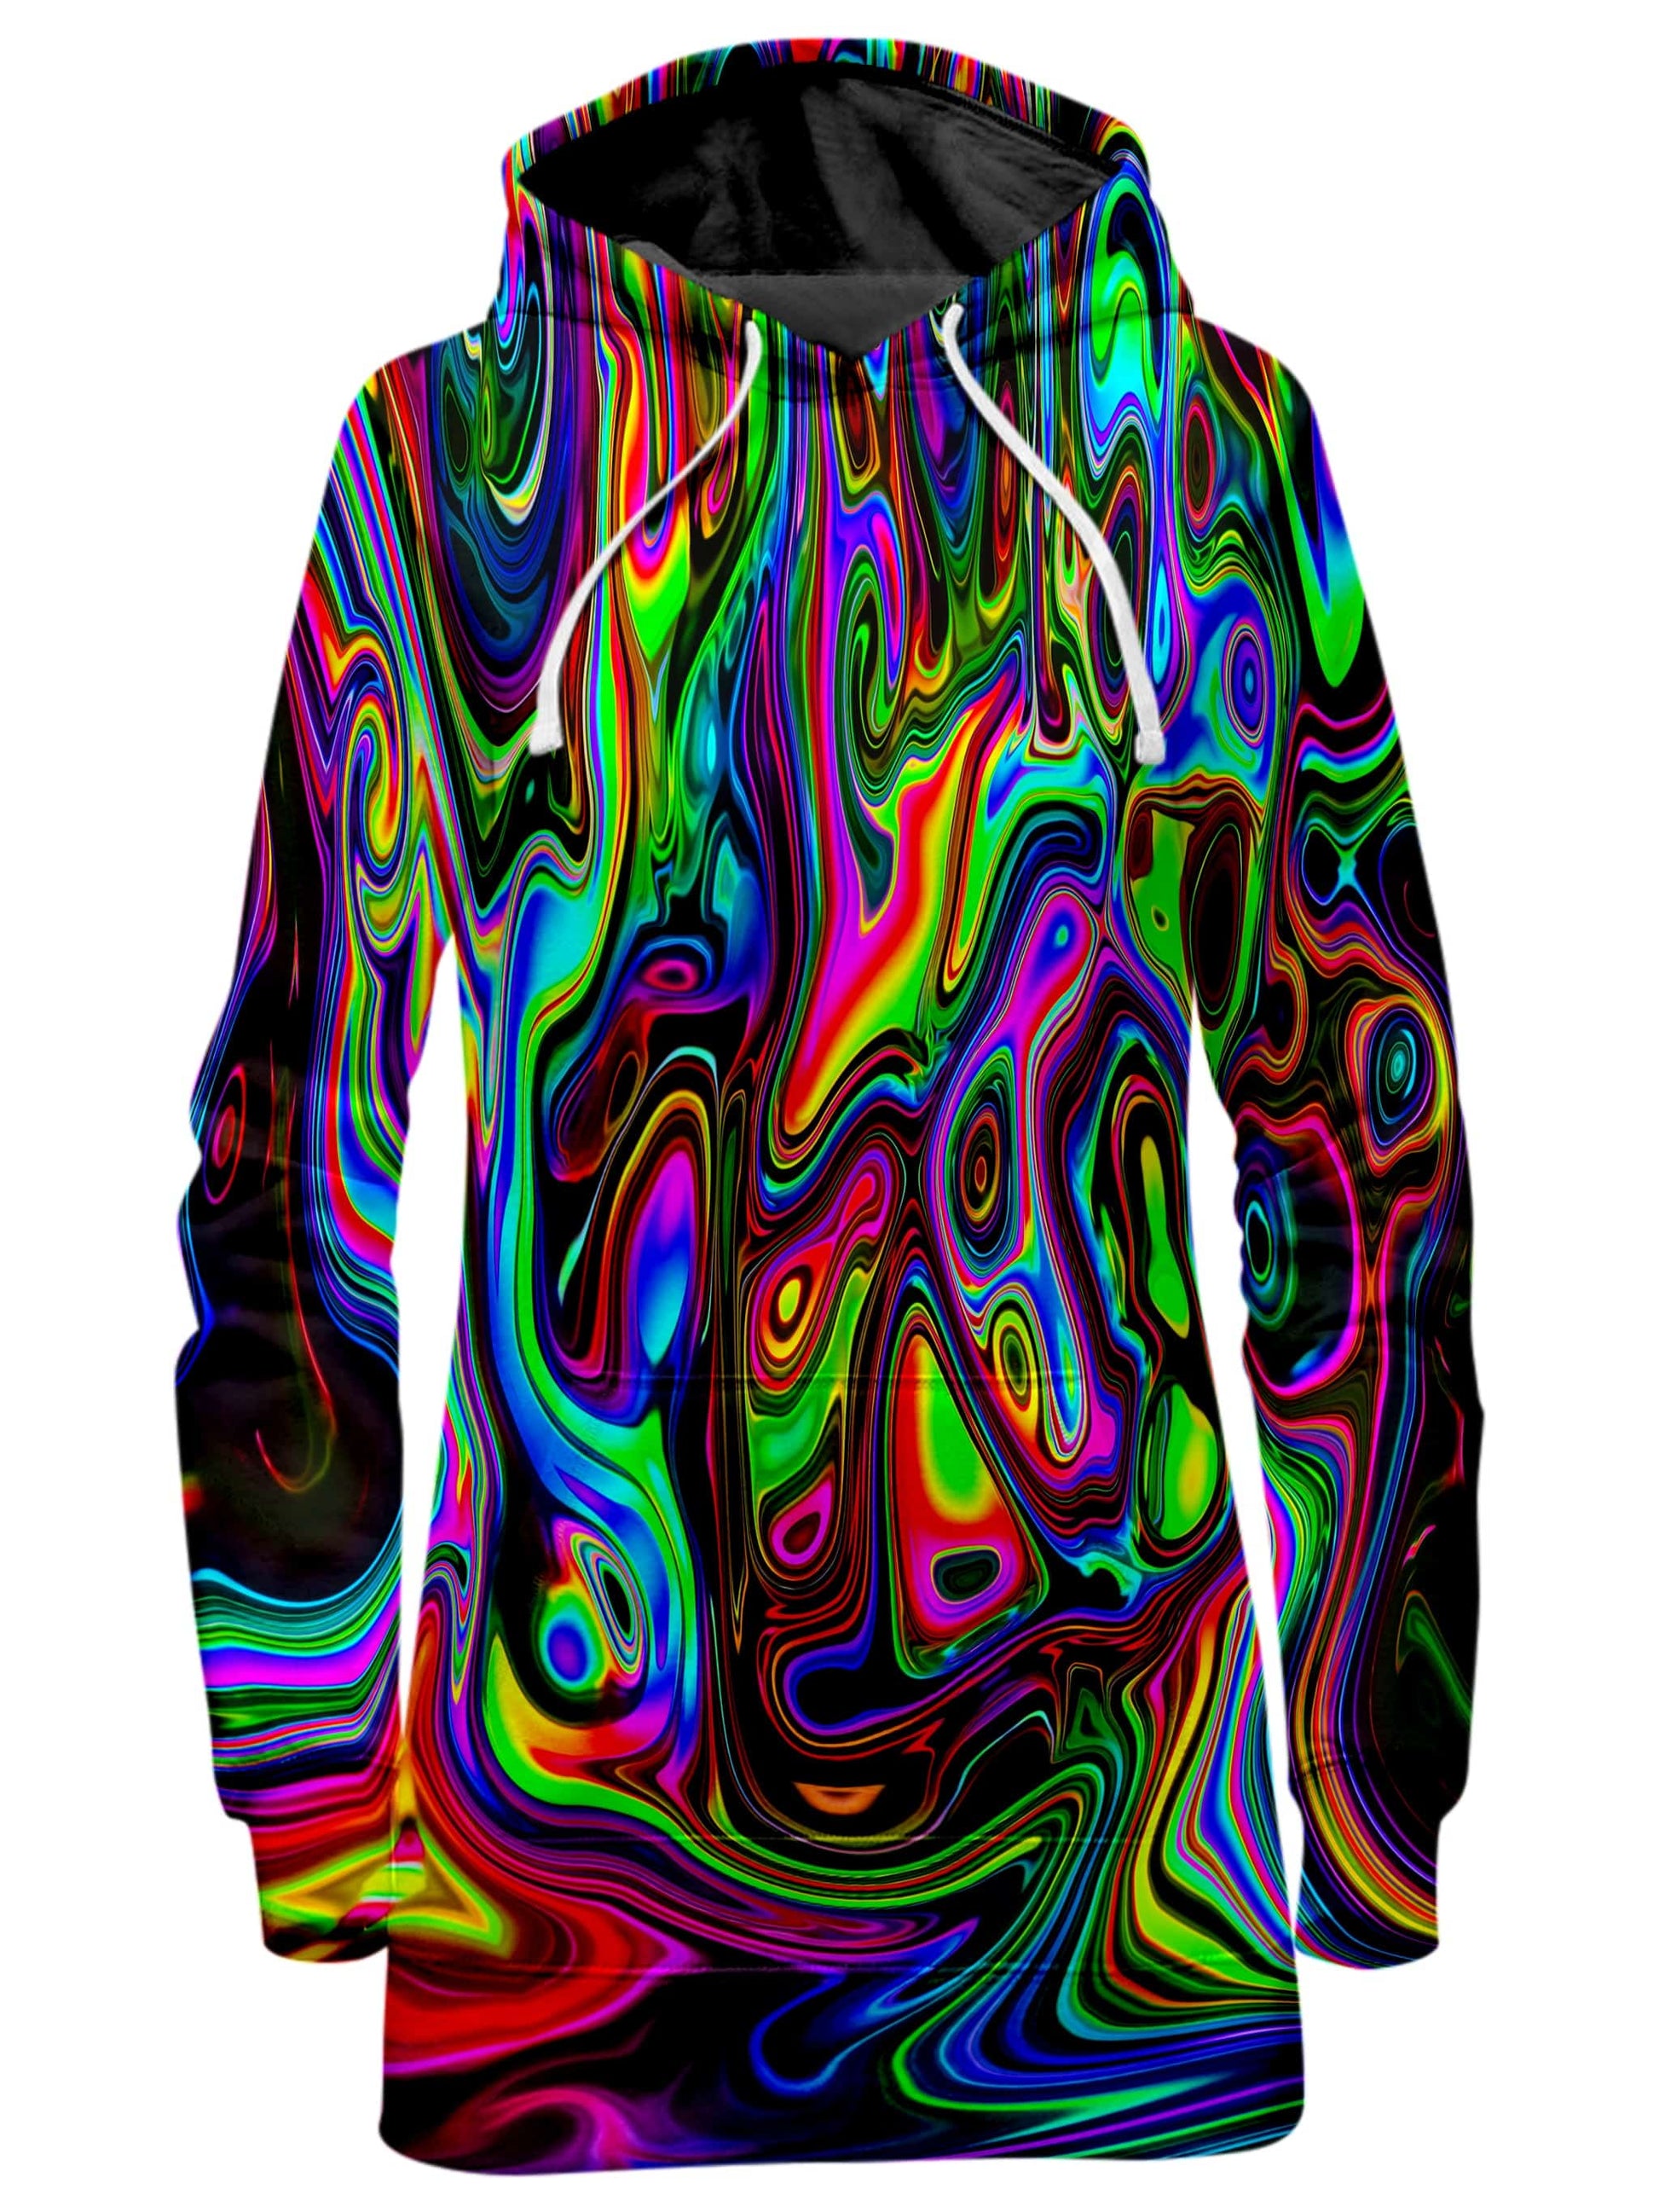 Acid Drop Hoodie Dress and Leggings Combo, Psychedelic Pourhouse, | iEDM